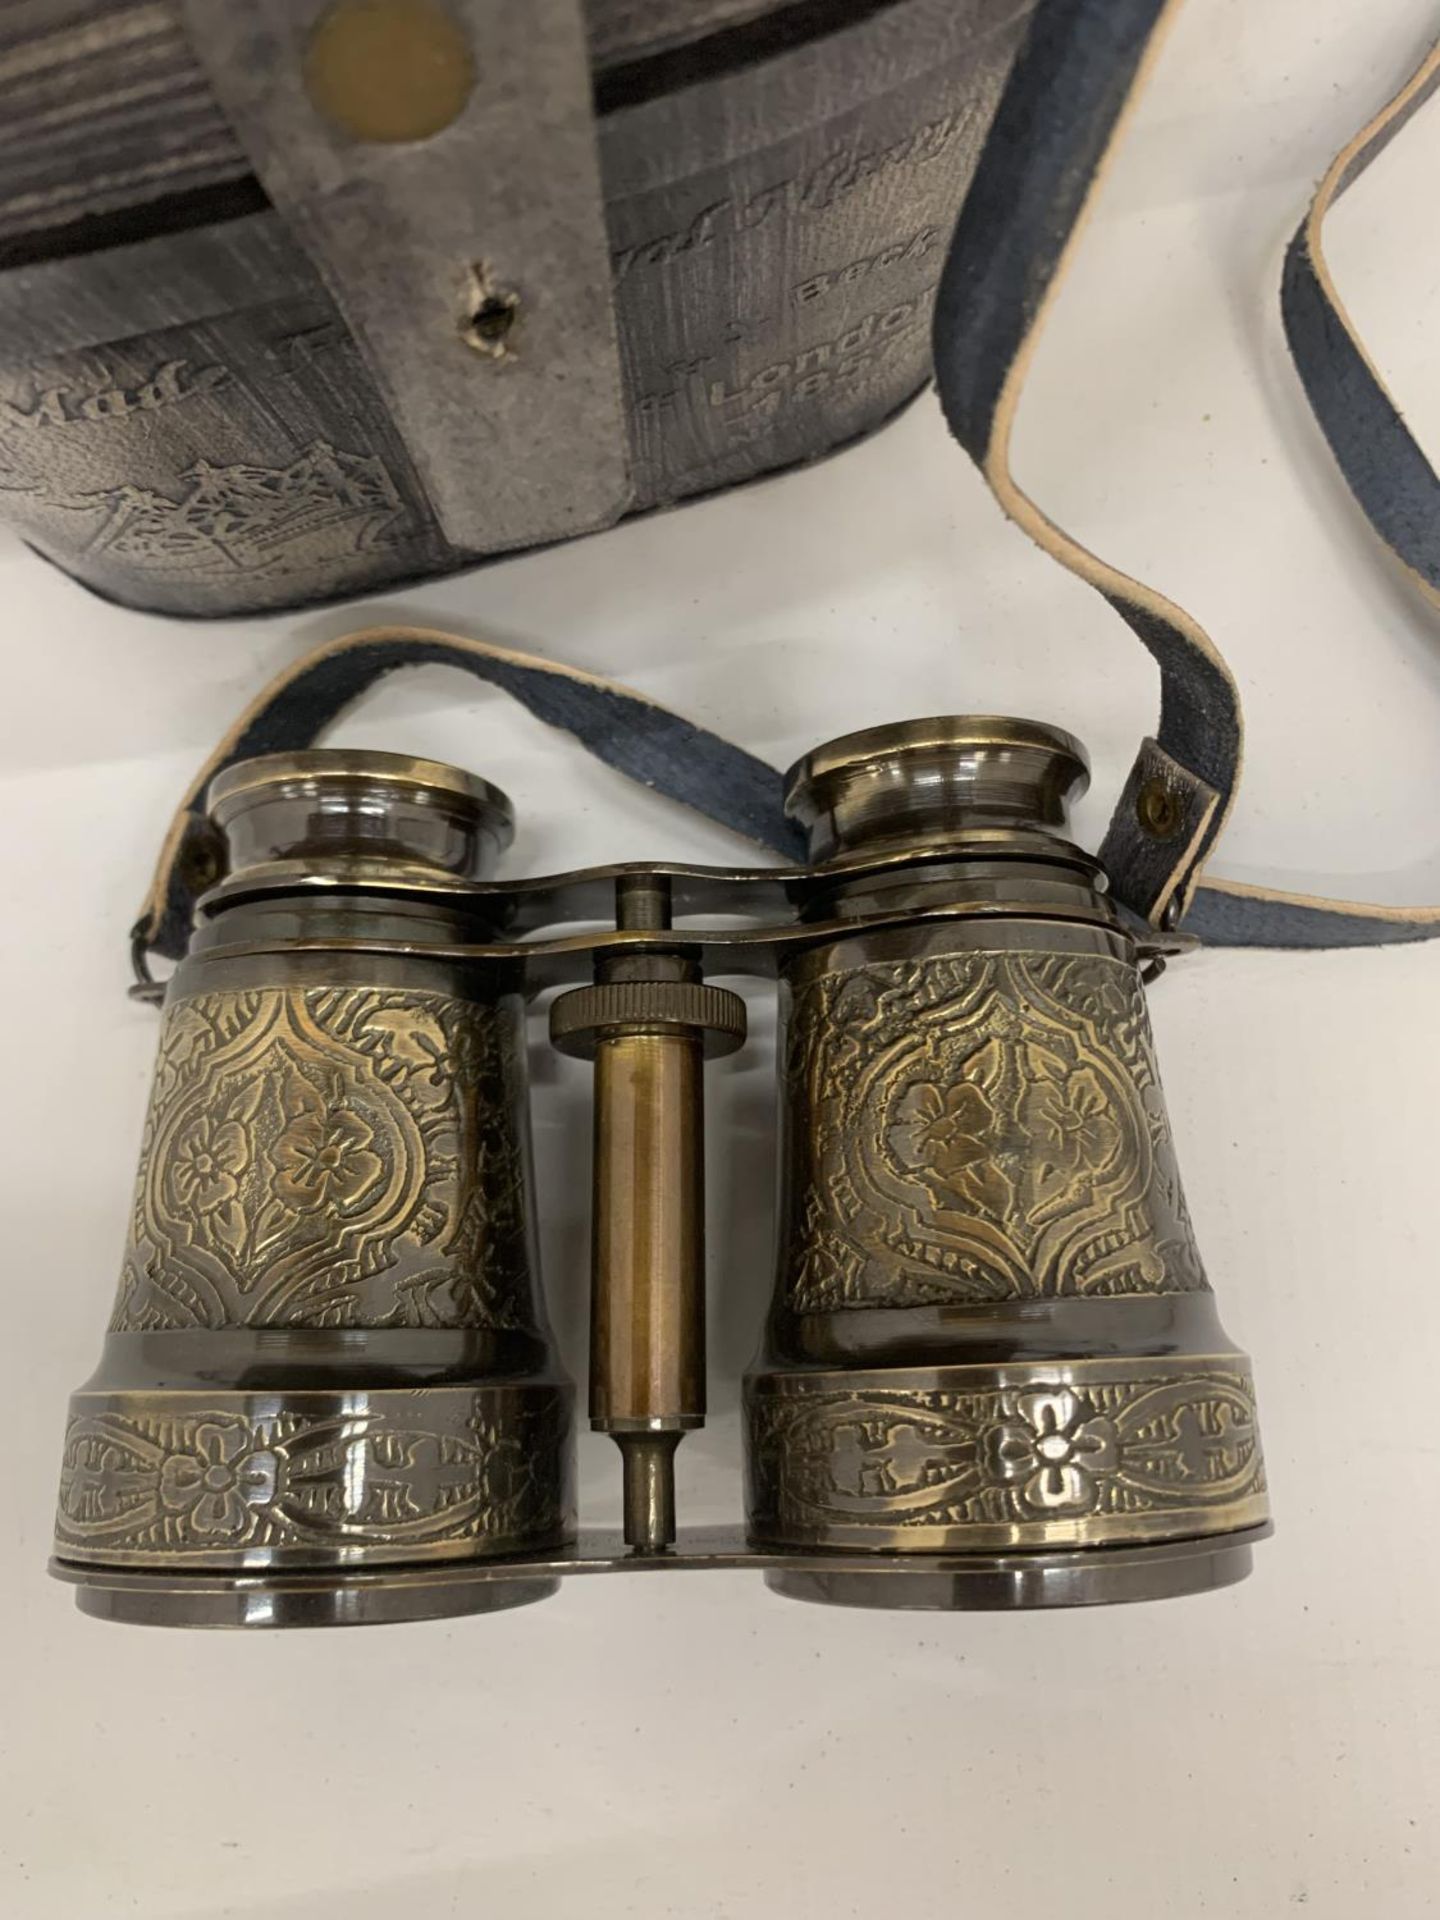 A PAIR OF BRASS BINOCULARS IN A ROYAL NAVY CASE - Image 2 of 2